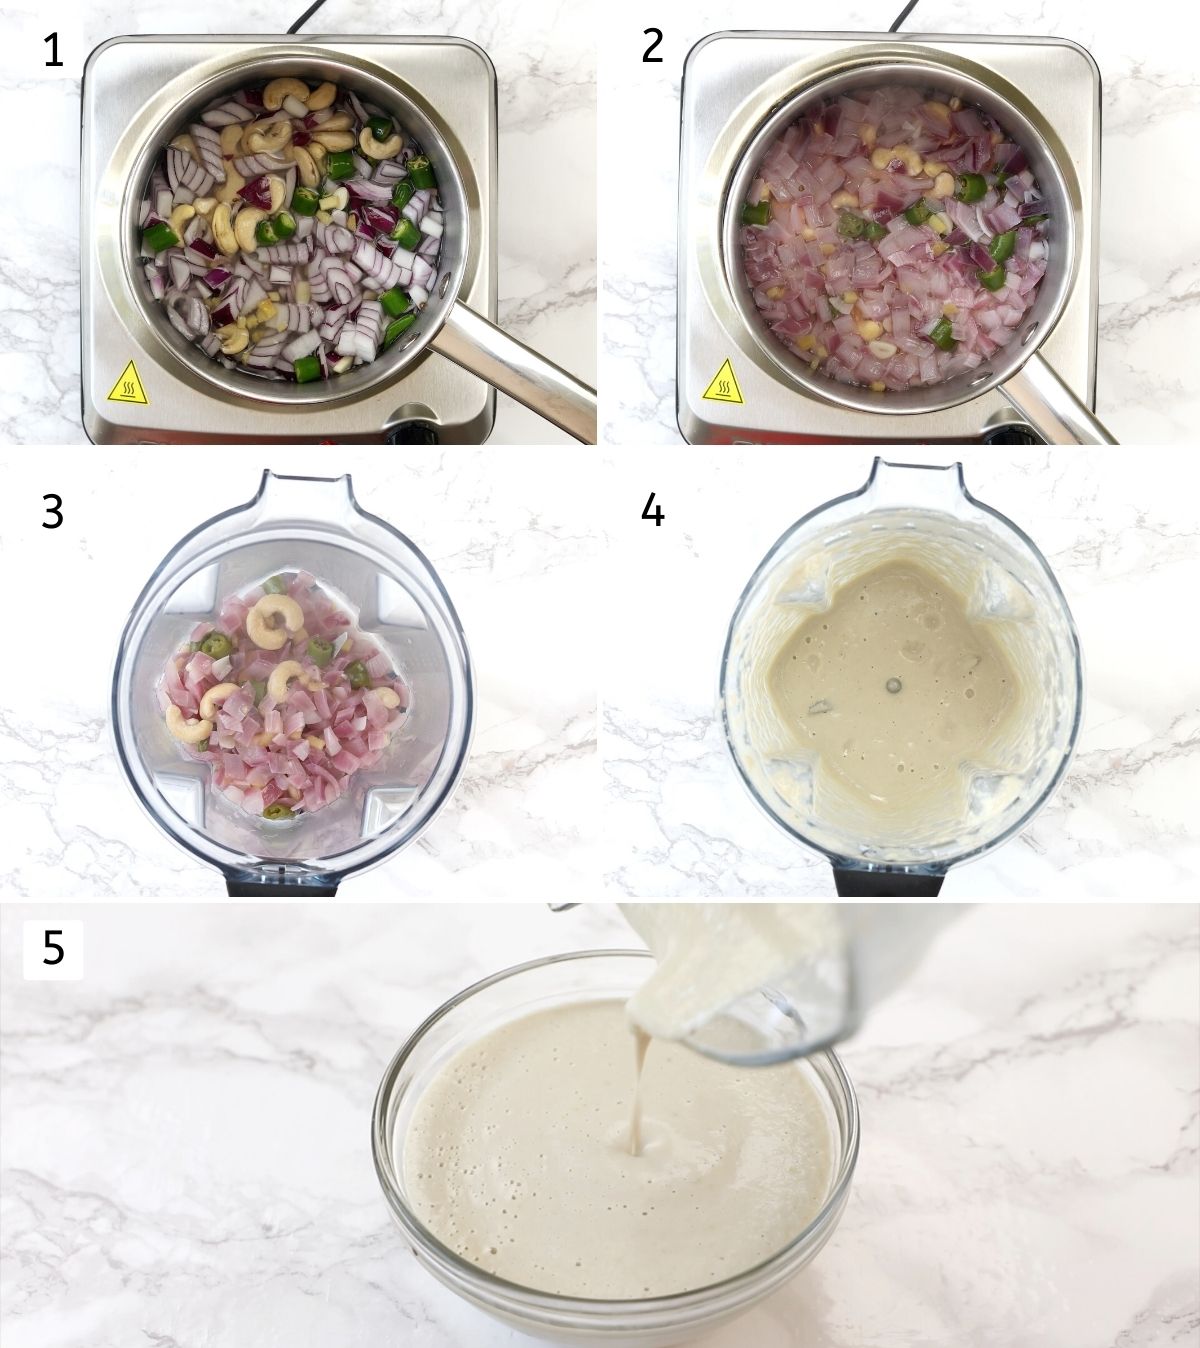 Collage of 5 steps showing cooking onion gravy ingredinets, grinding to make paste.